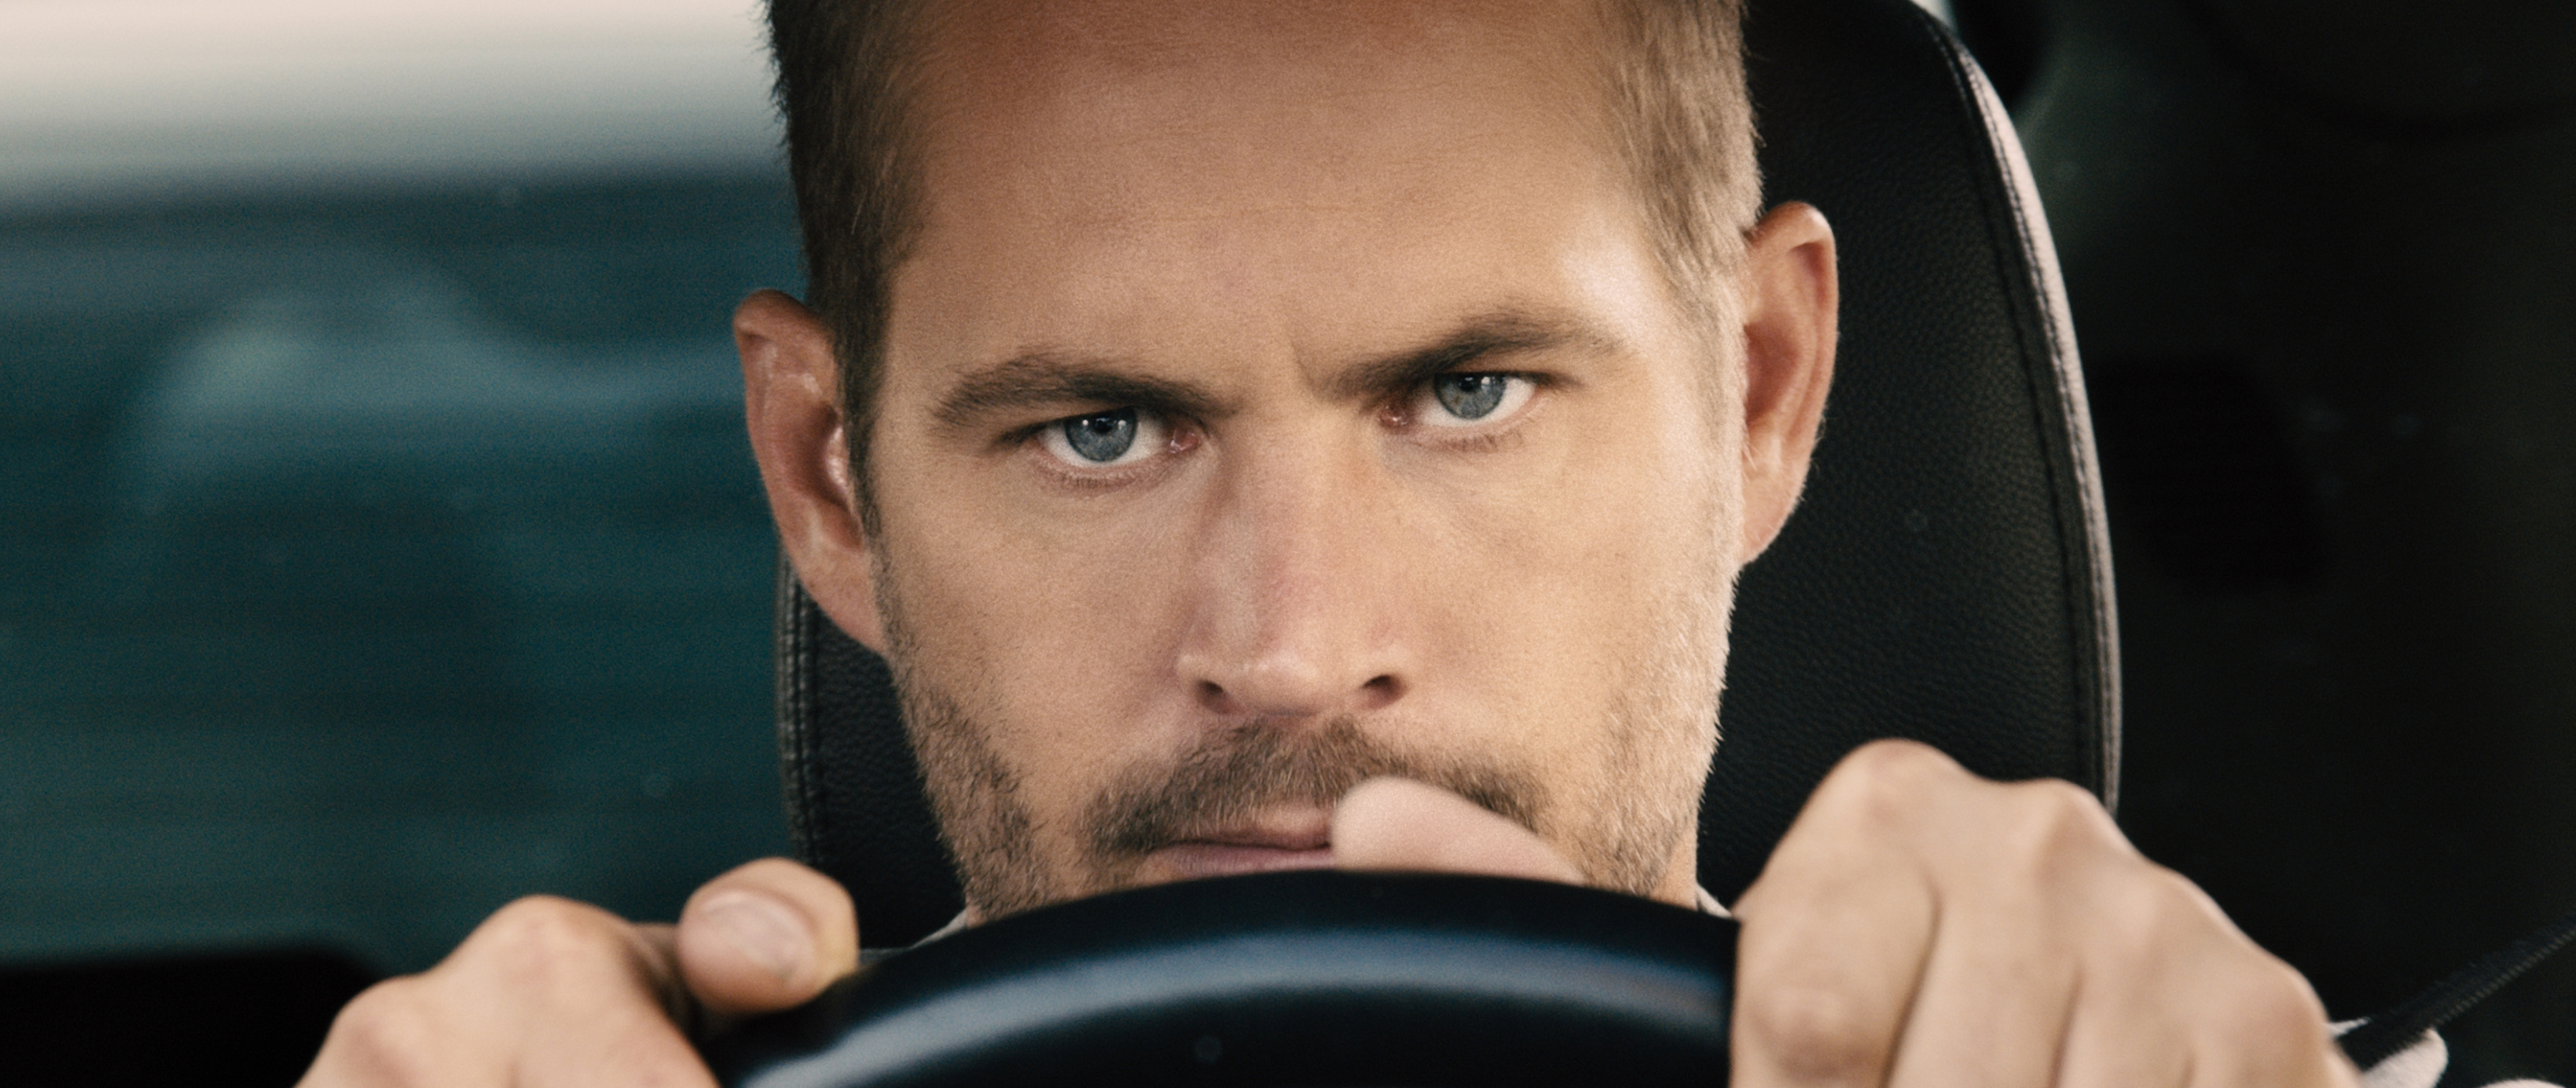 What is the plot of Furious 7?